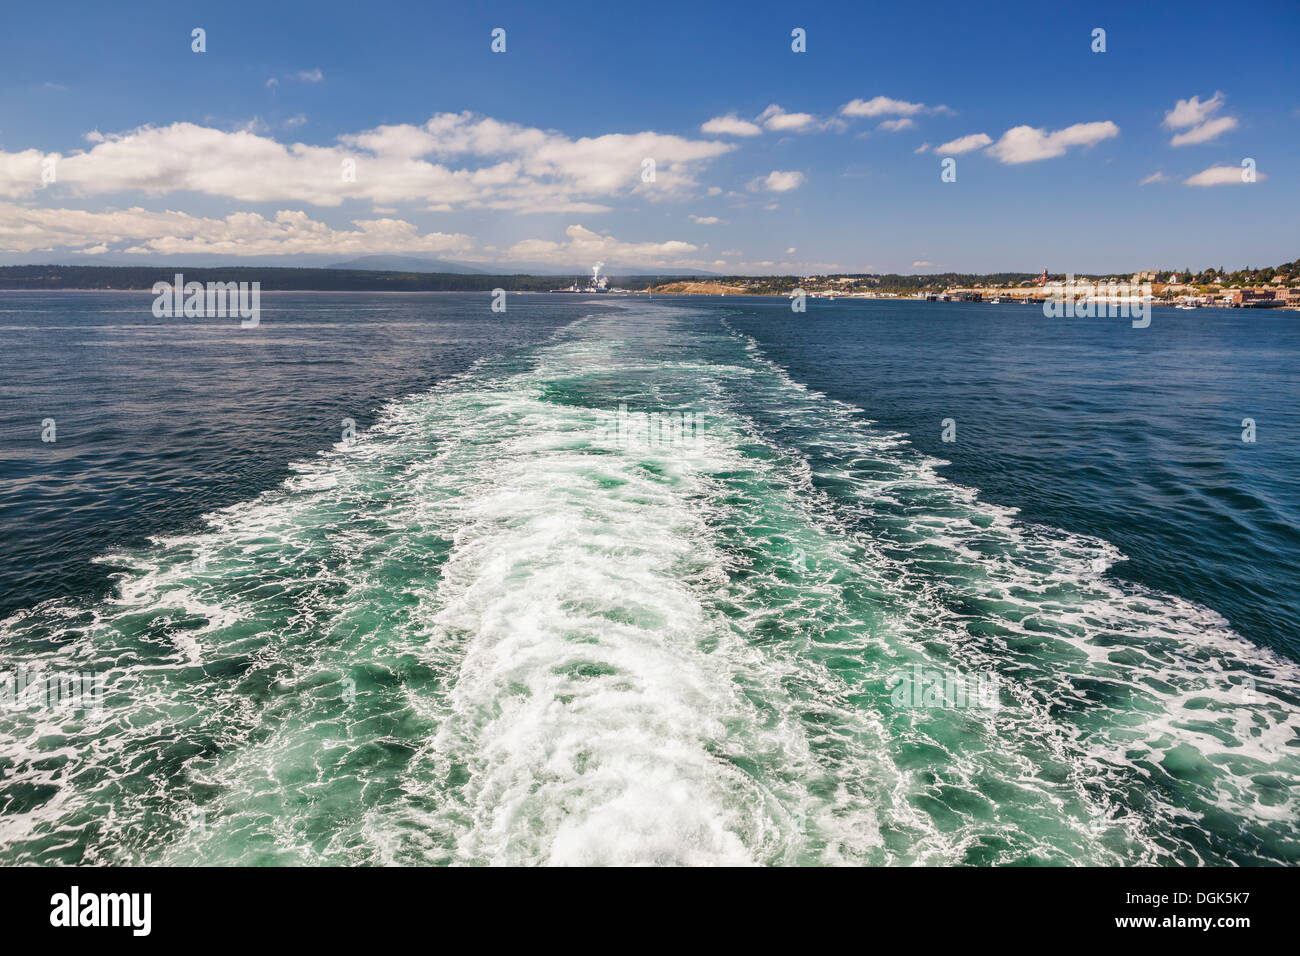 Wake left by ferry boat in Puget Sound, Washington Stock Photo